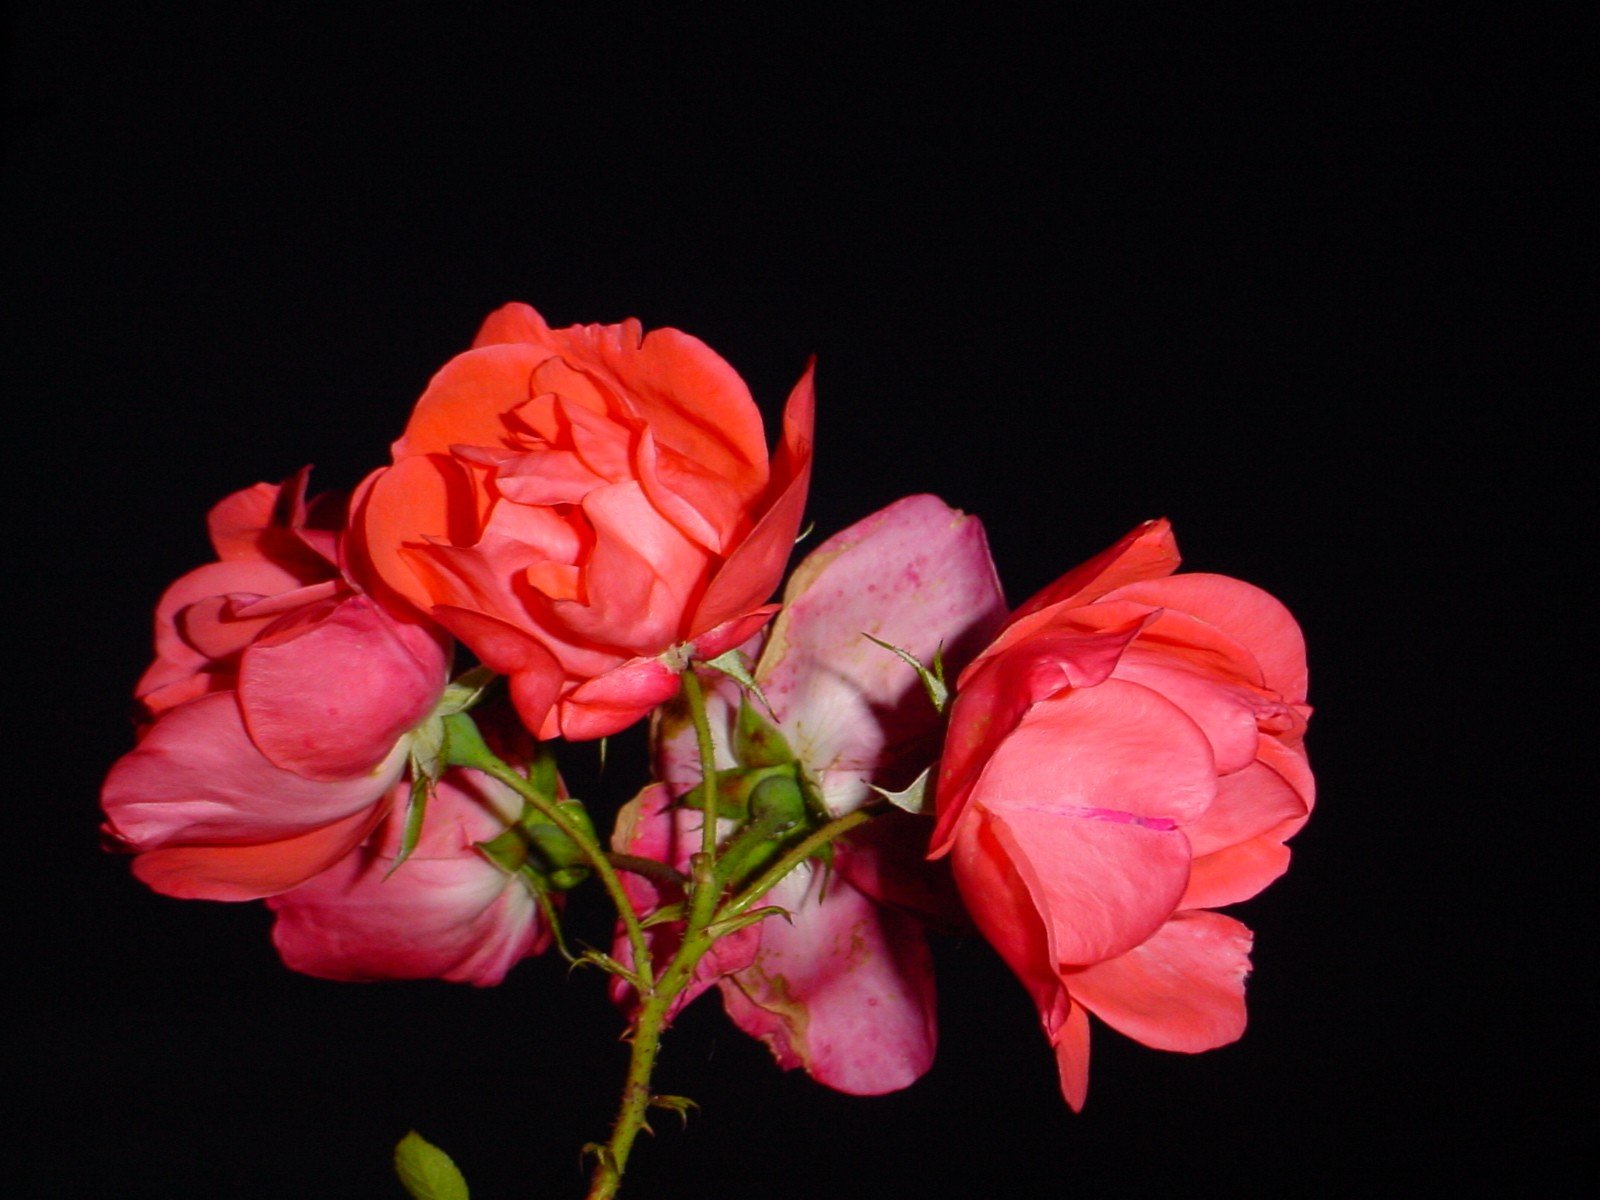 a picture of some pink roses against the dark background